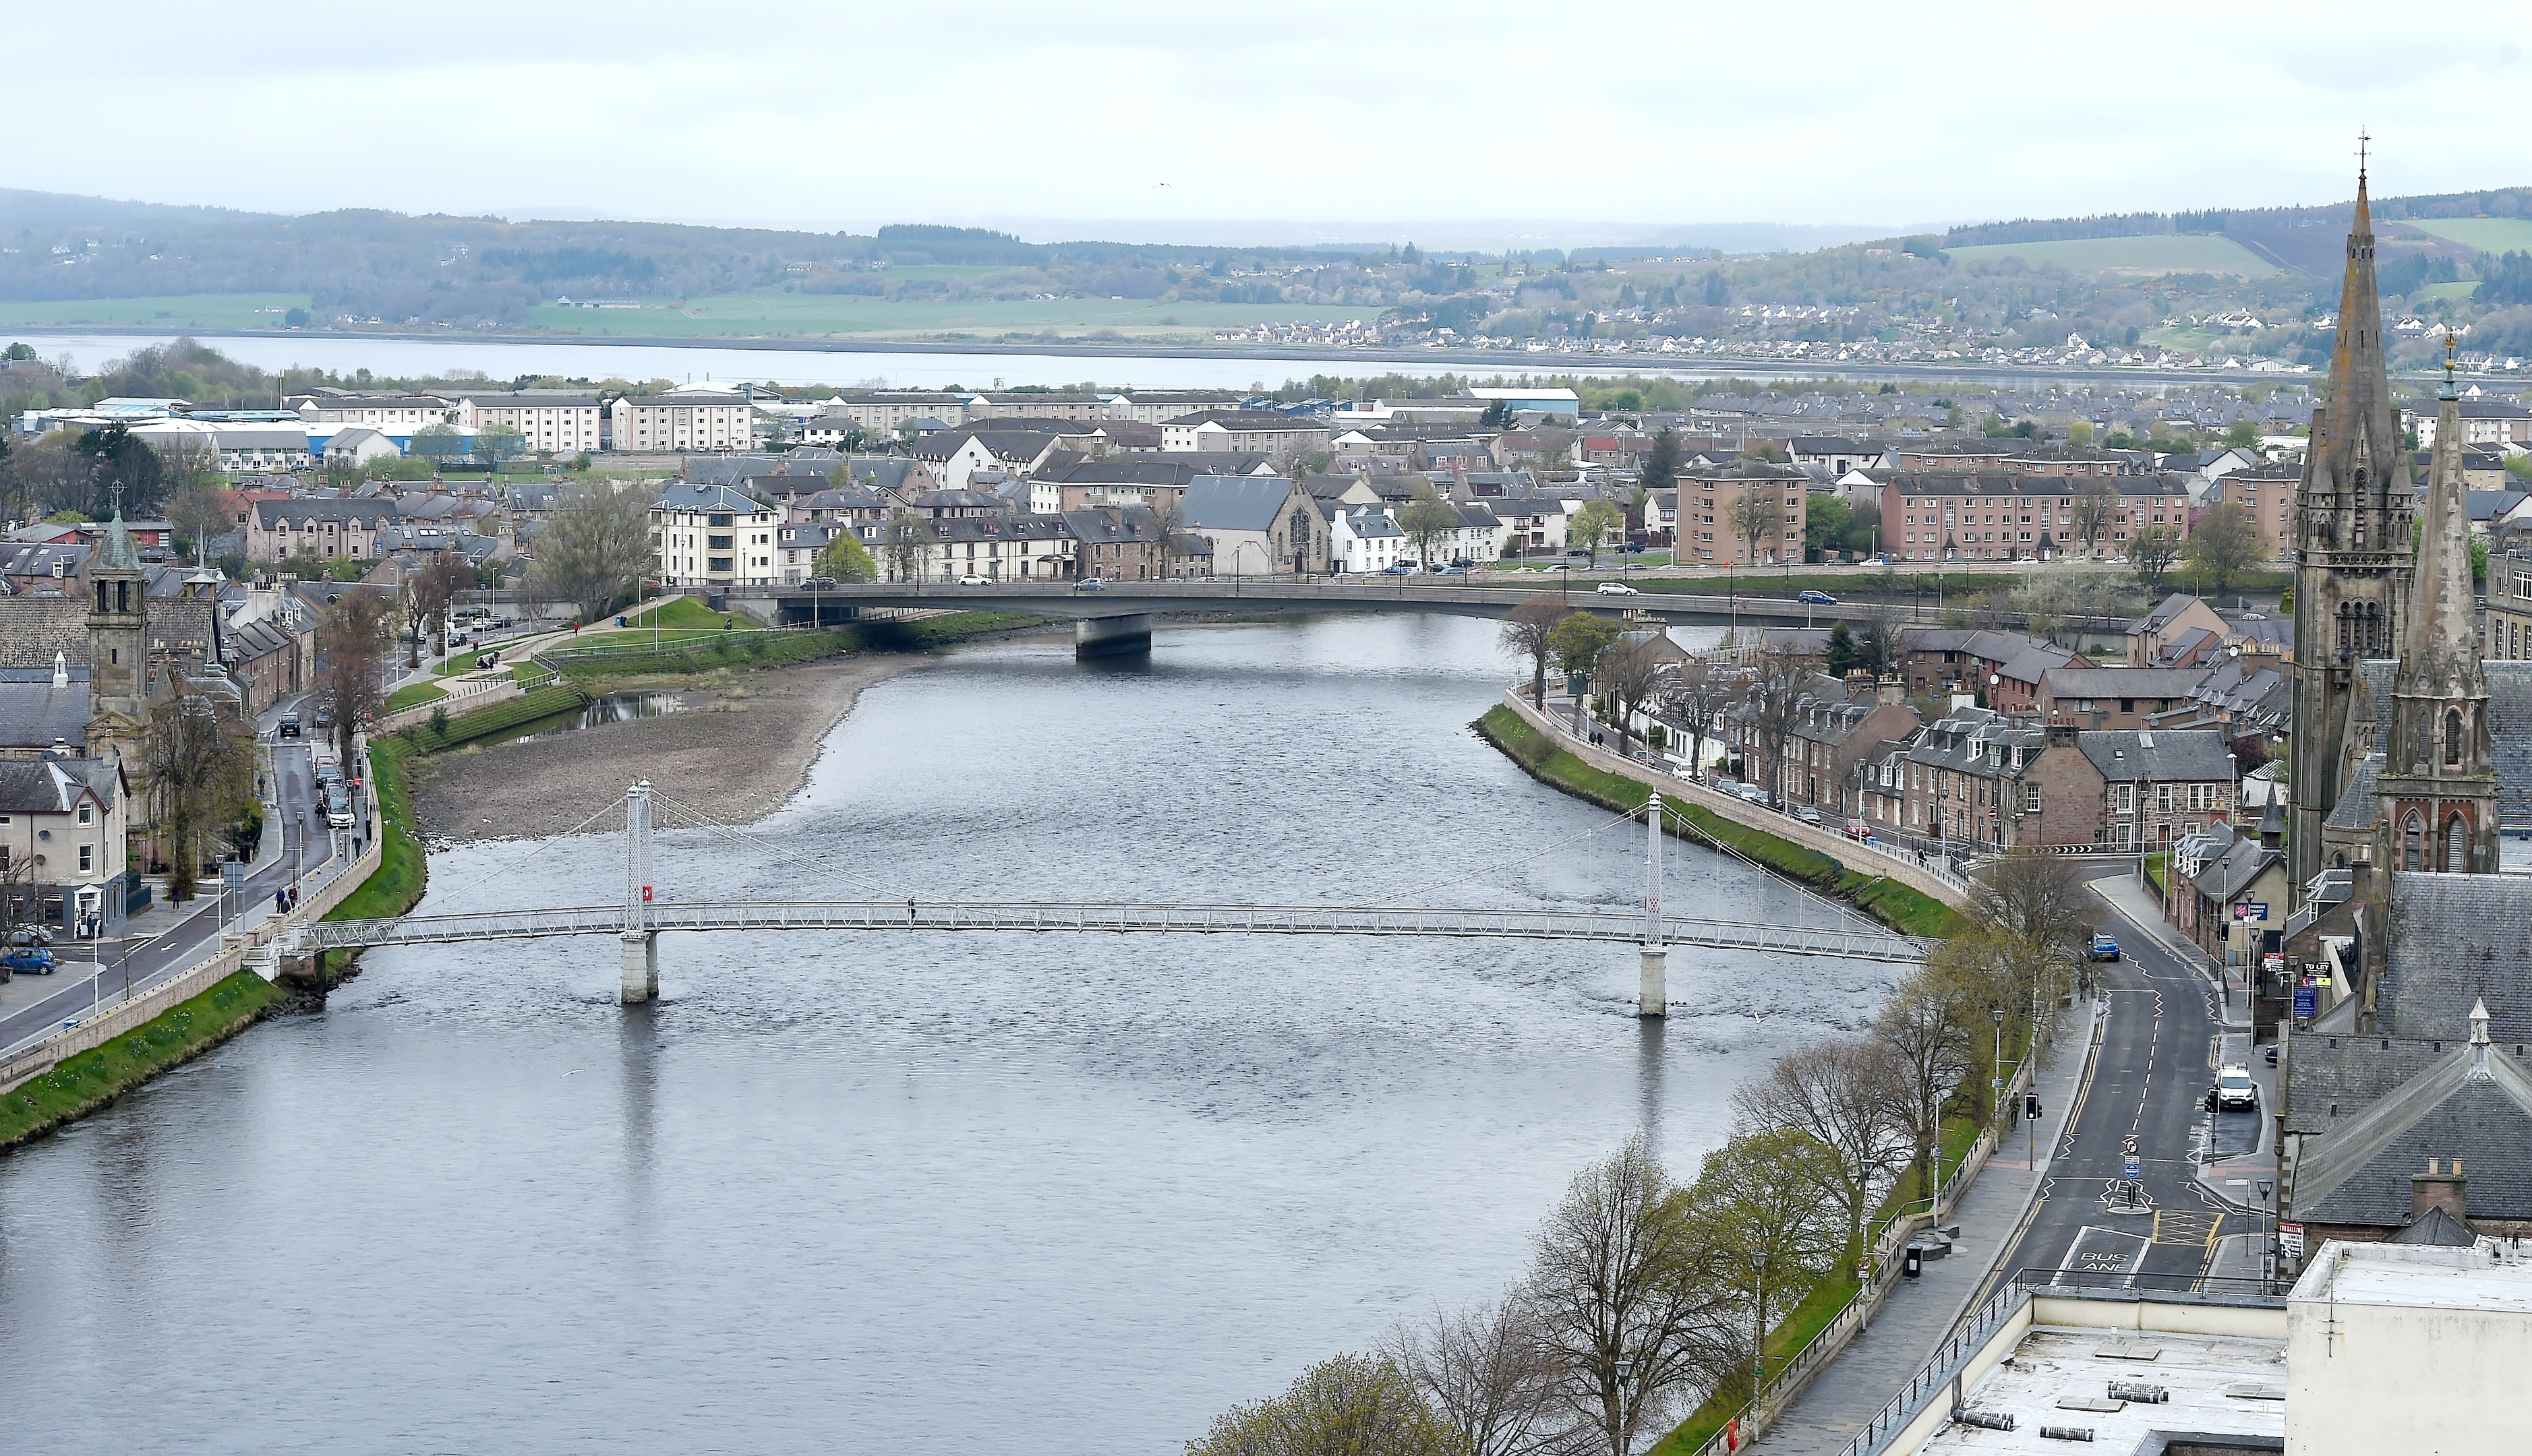 Inverness has been named the third most lucrative destination in Scotland for holiday makers using the Airbnb platform